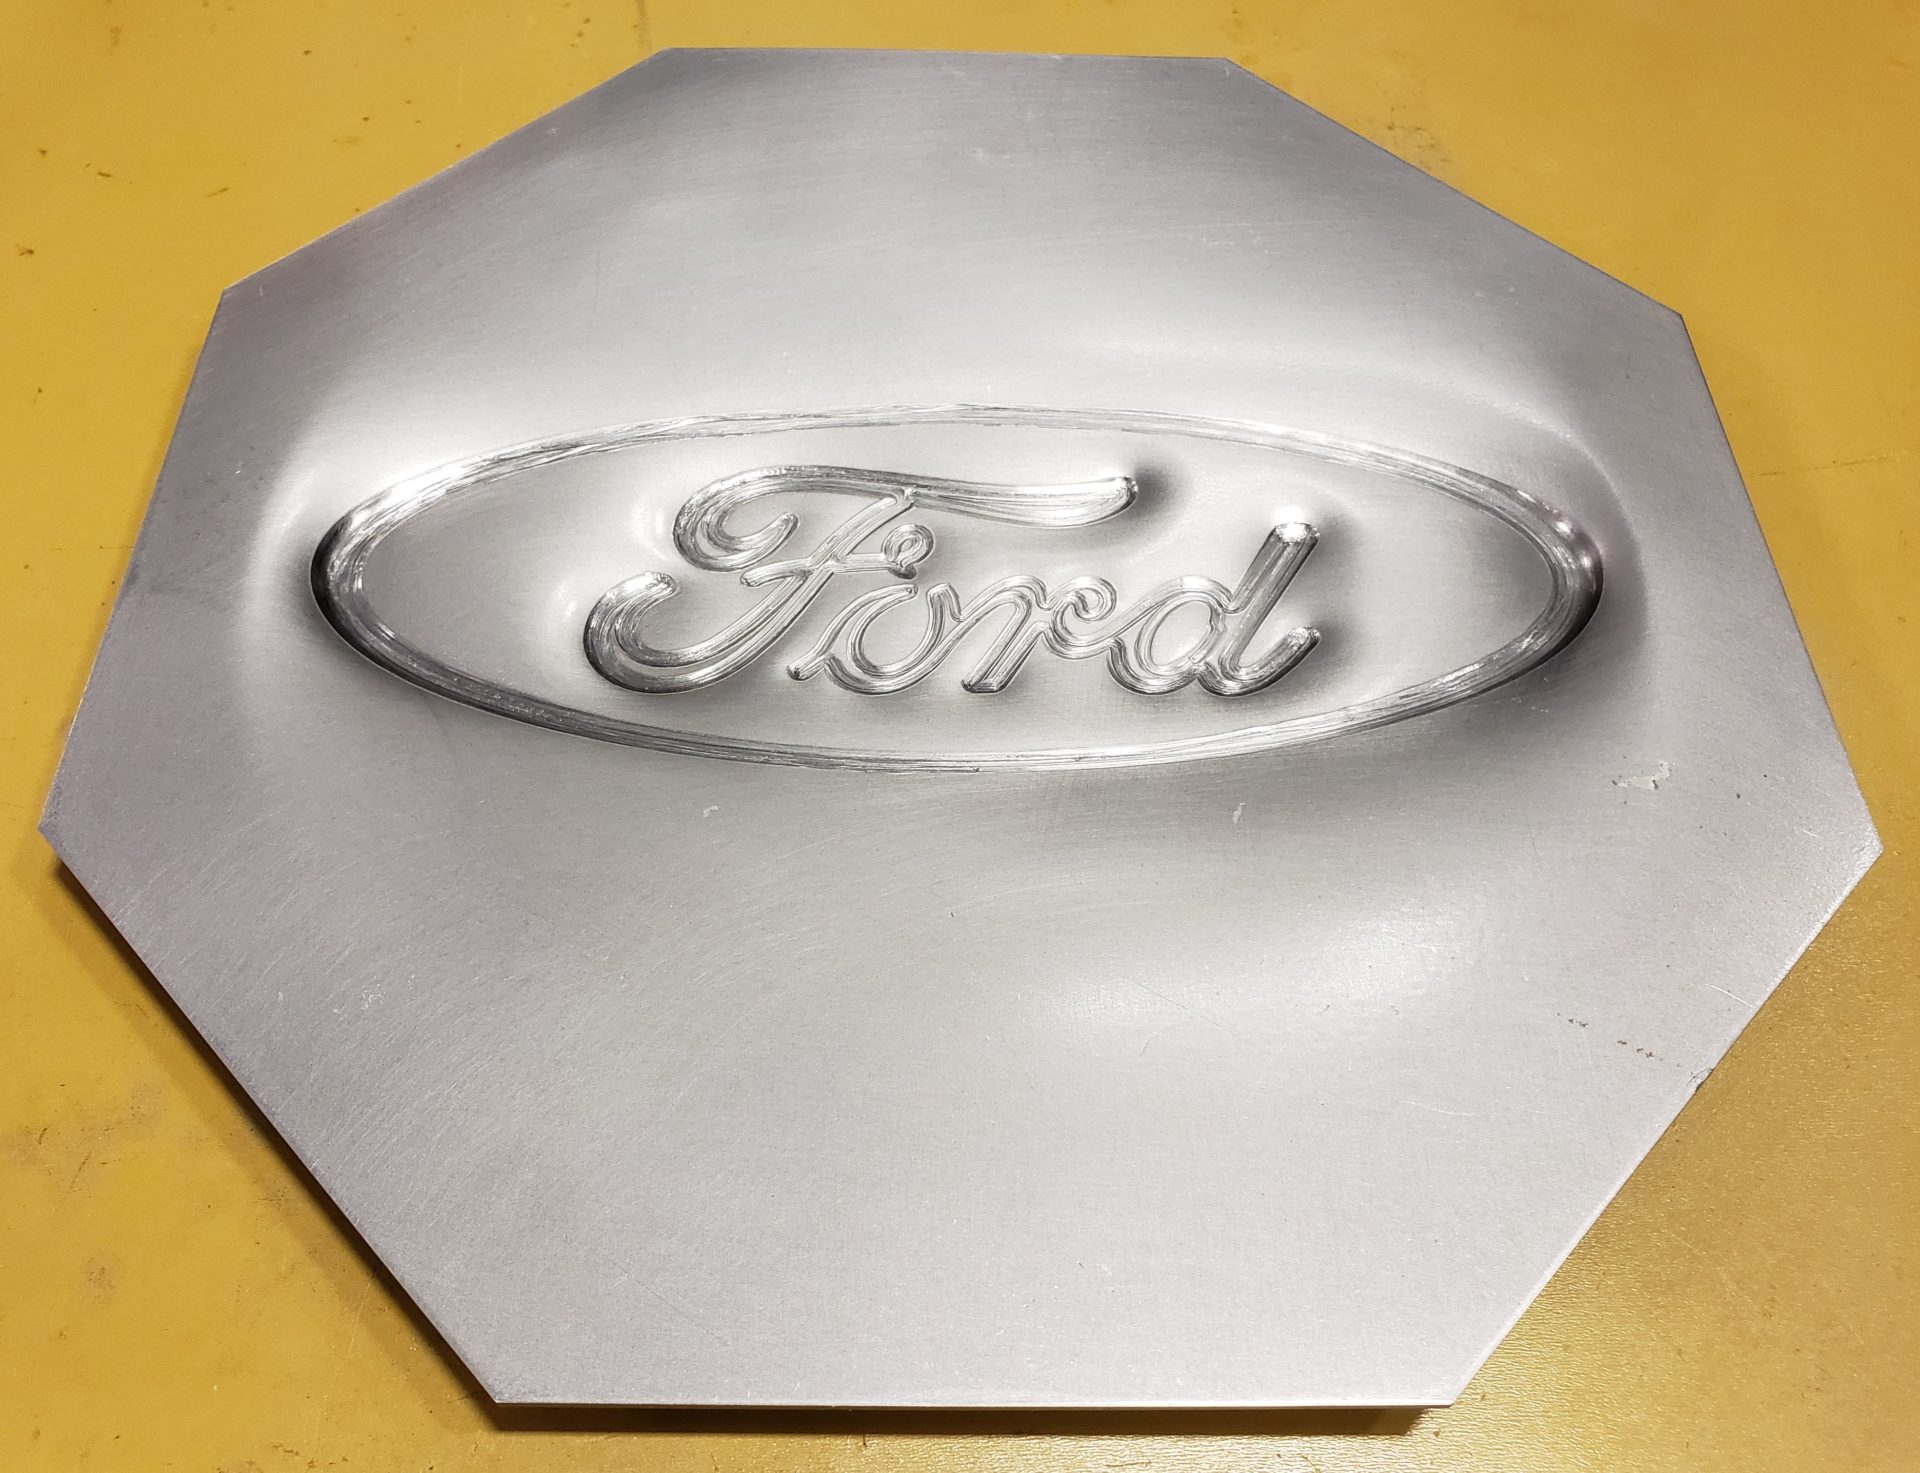 Incrementally formed Ford logo